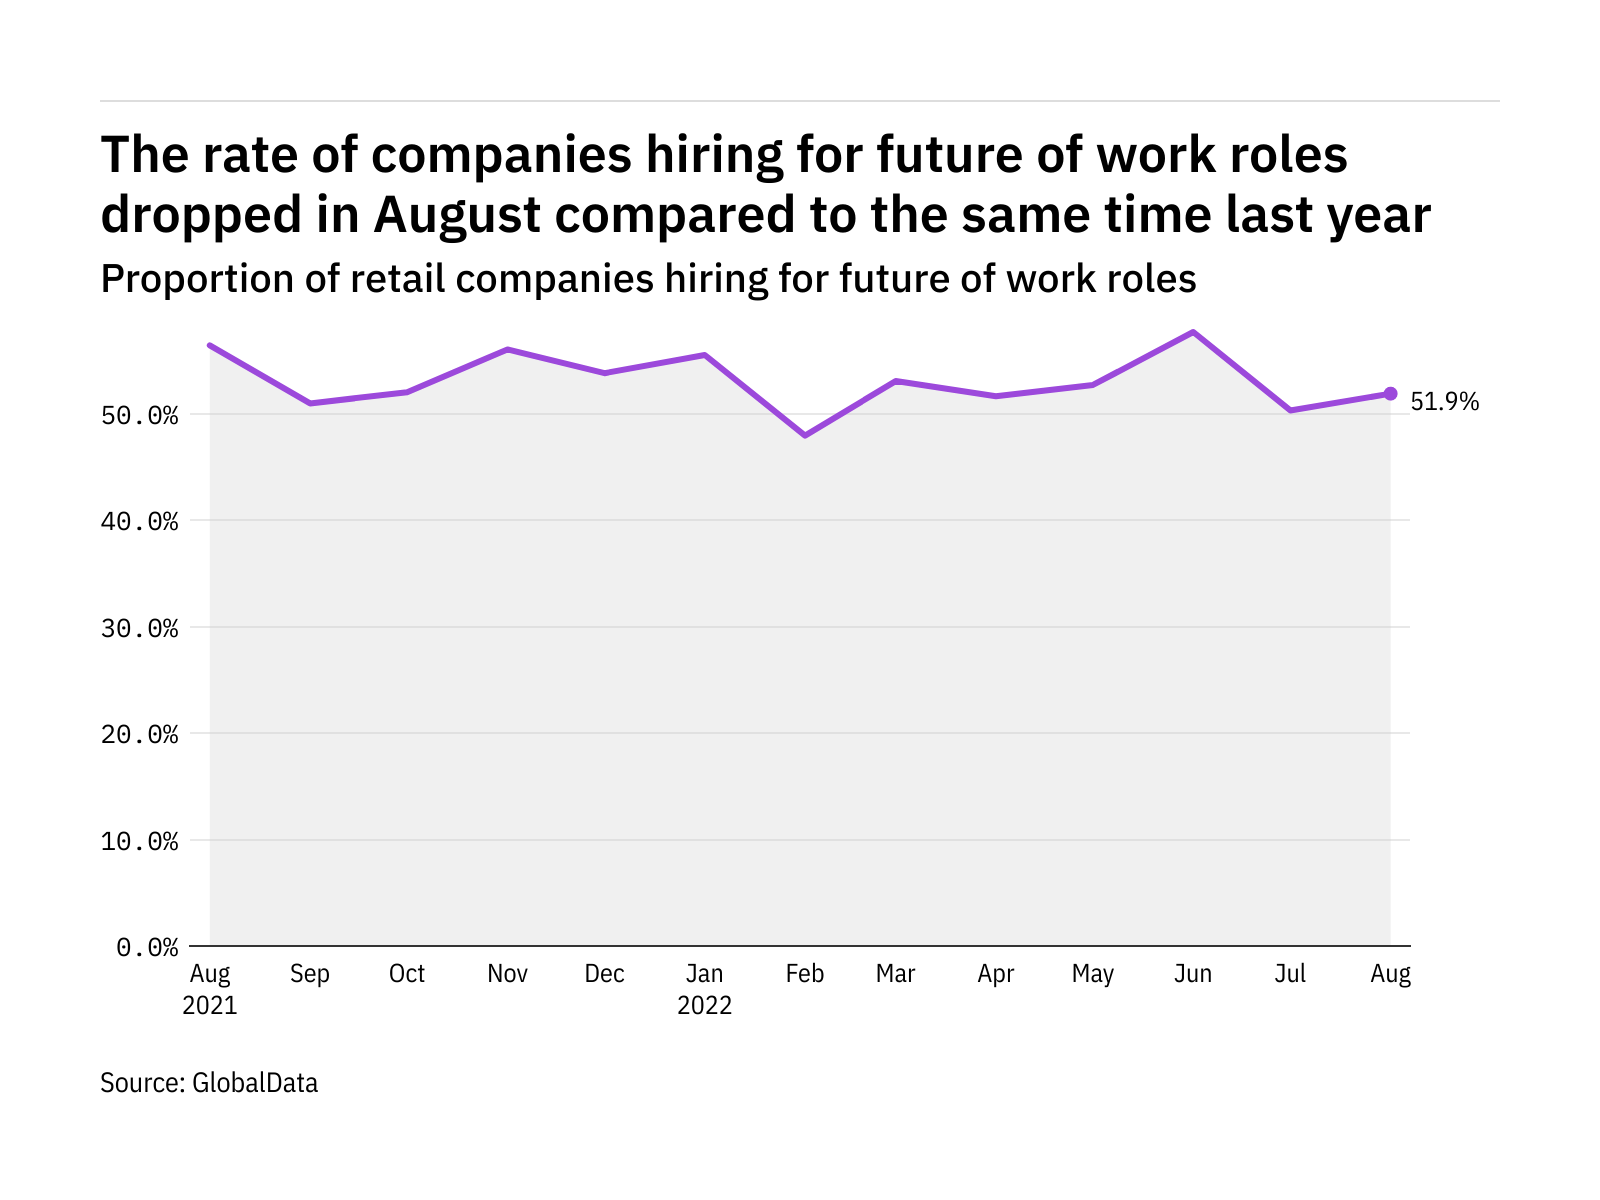 Future of work hiring levels in the retail industry dropped in August 2022